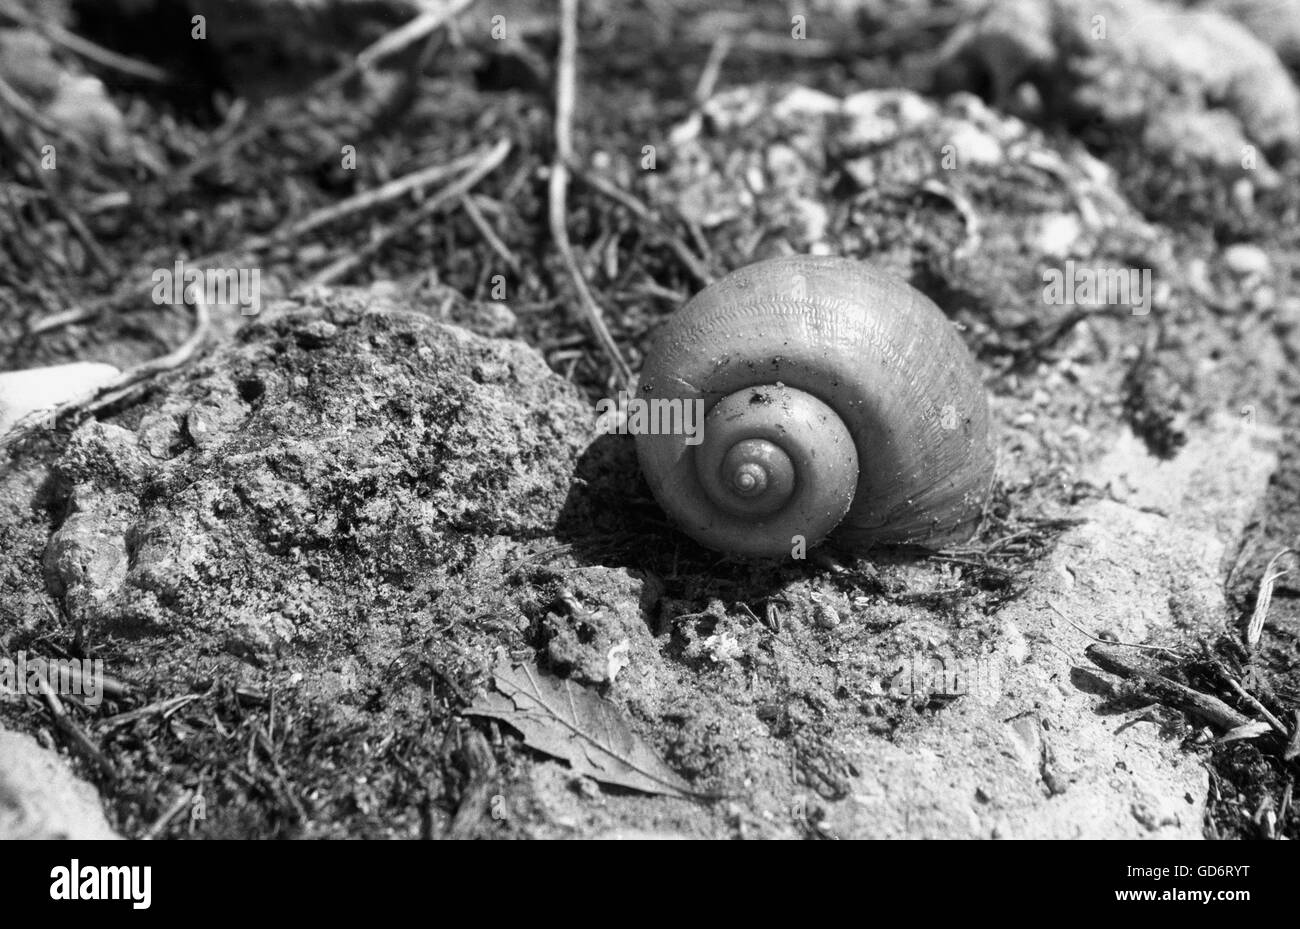 A close up study of a snail in its natural central Florida habitat. Stock Photo